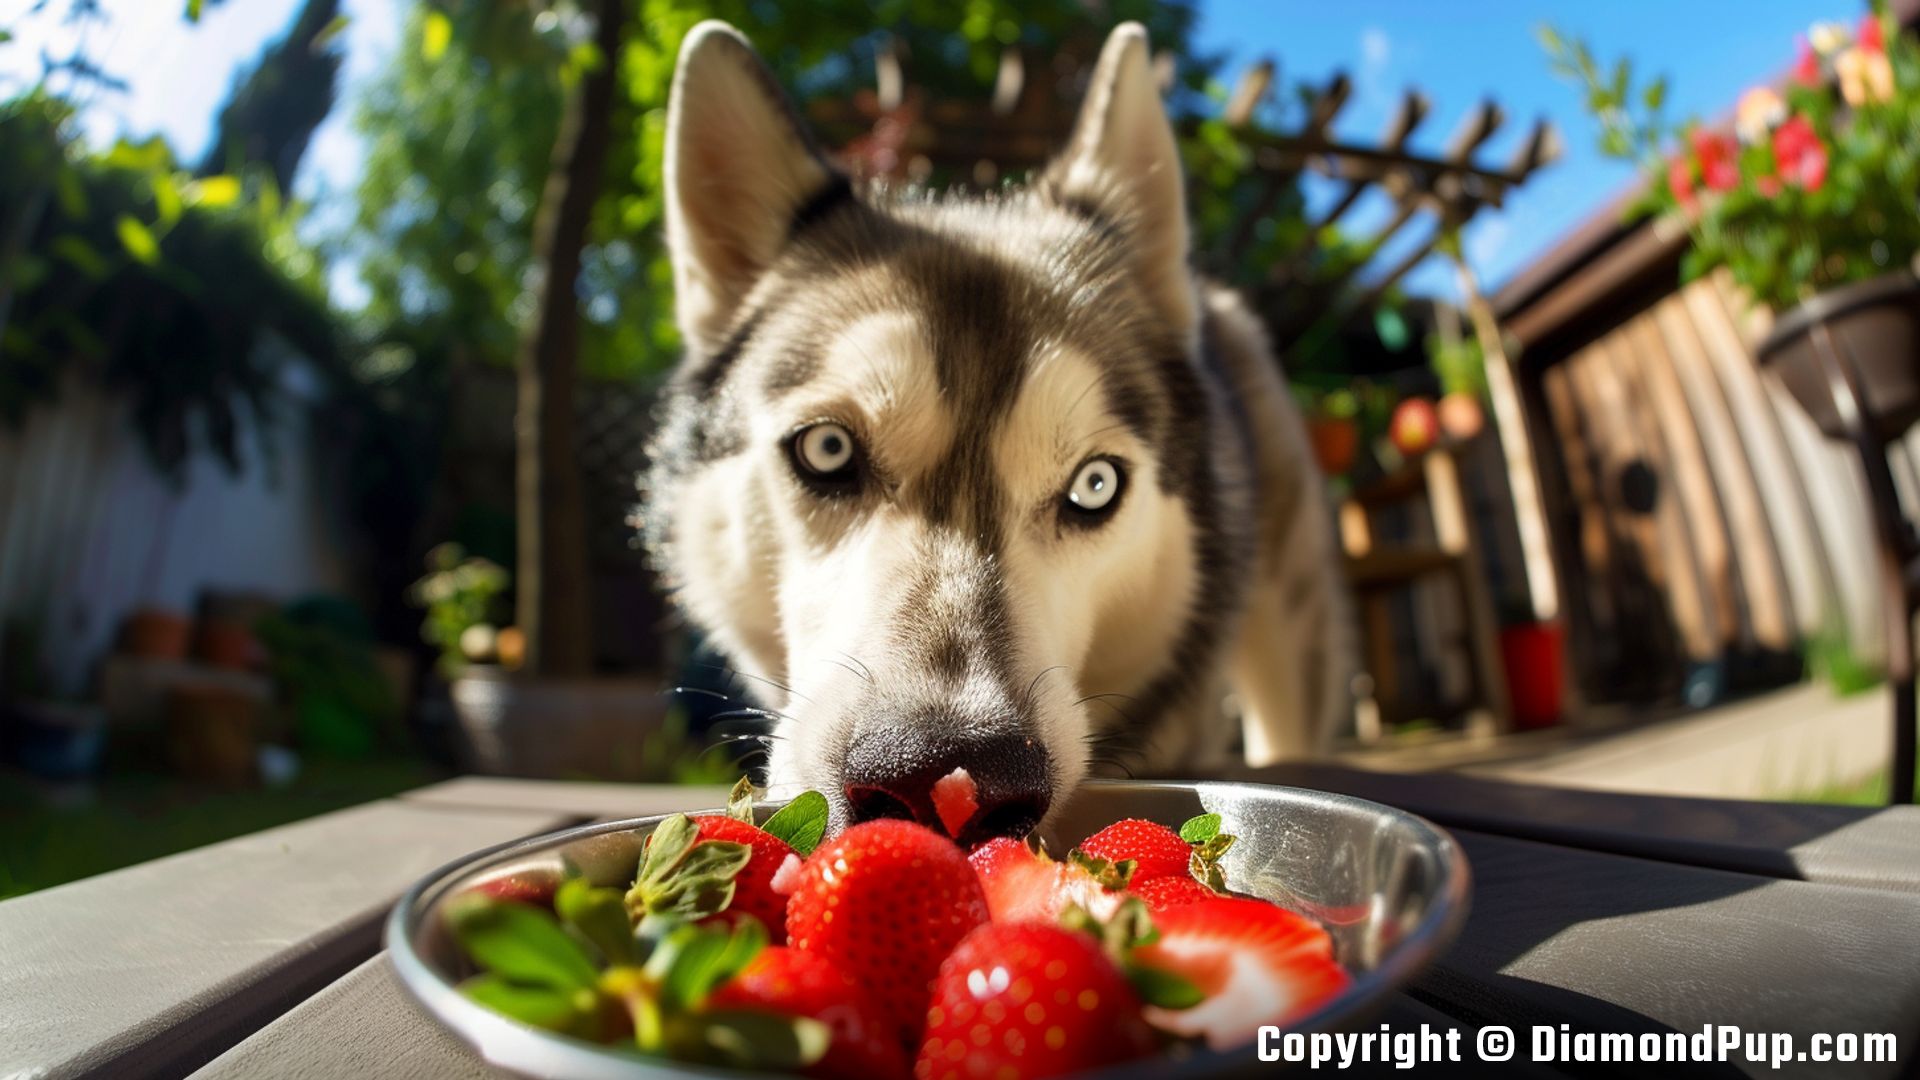 Image of a Cute Husky Snacking on Strawberries